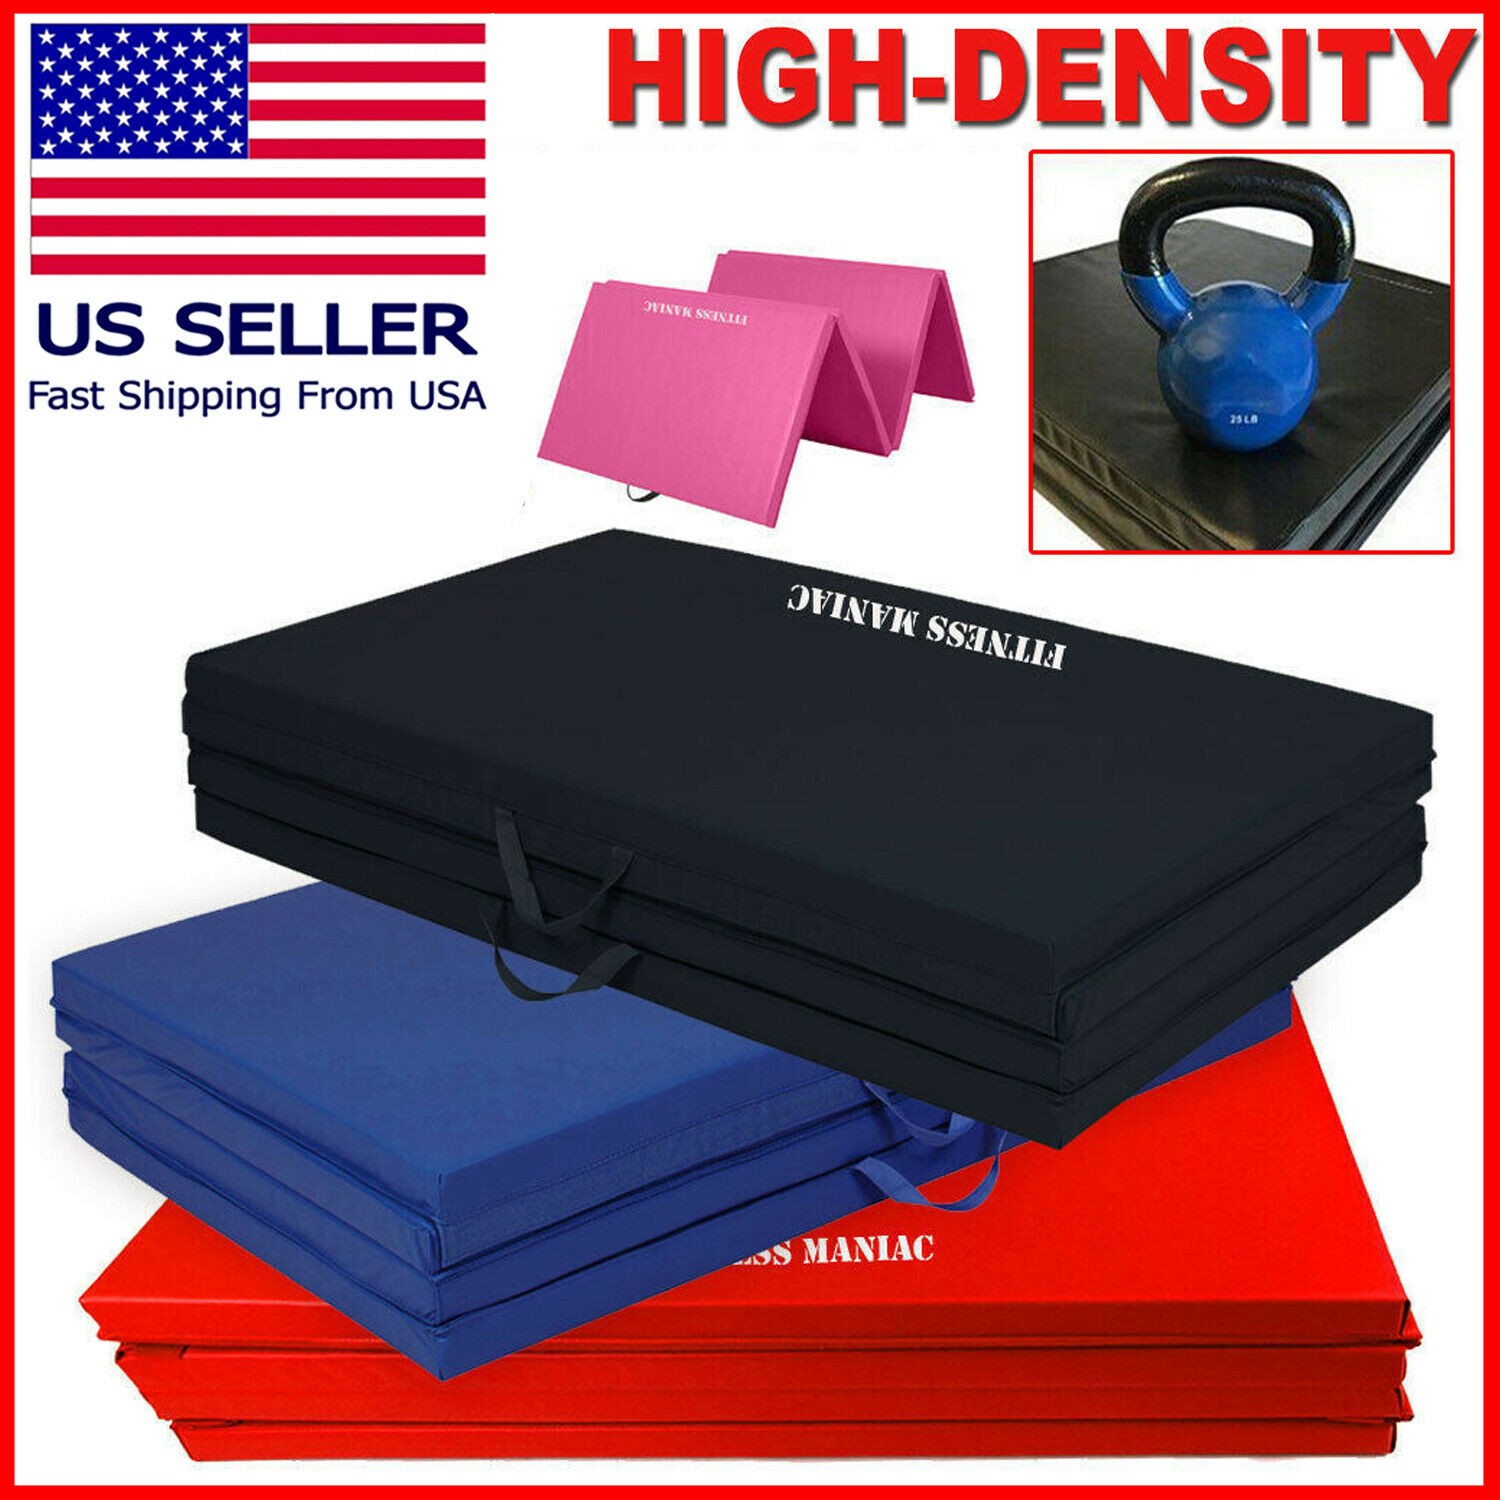 Heavy Duty Folding Mat Thick Foam Fitness Exercise Gymnastics Panel Gym Workout